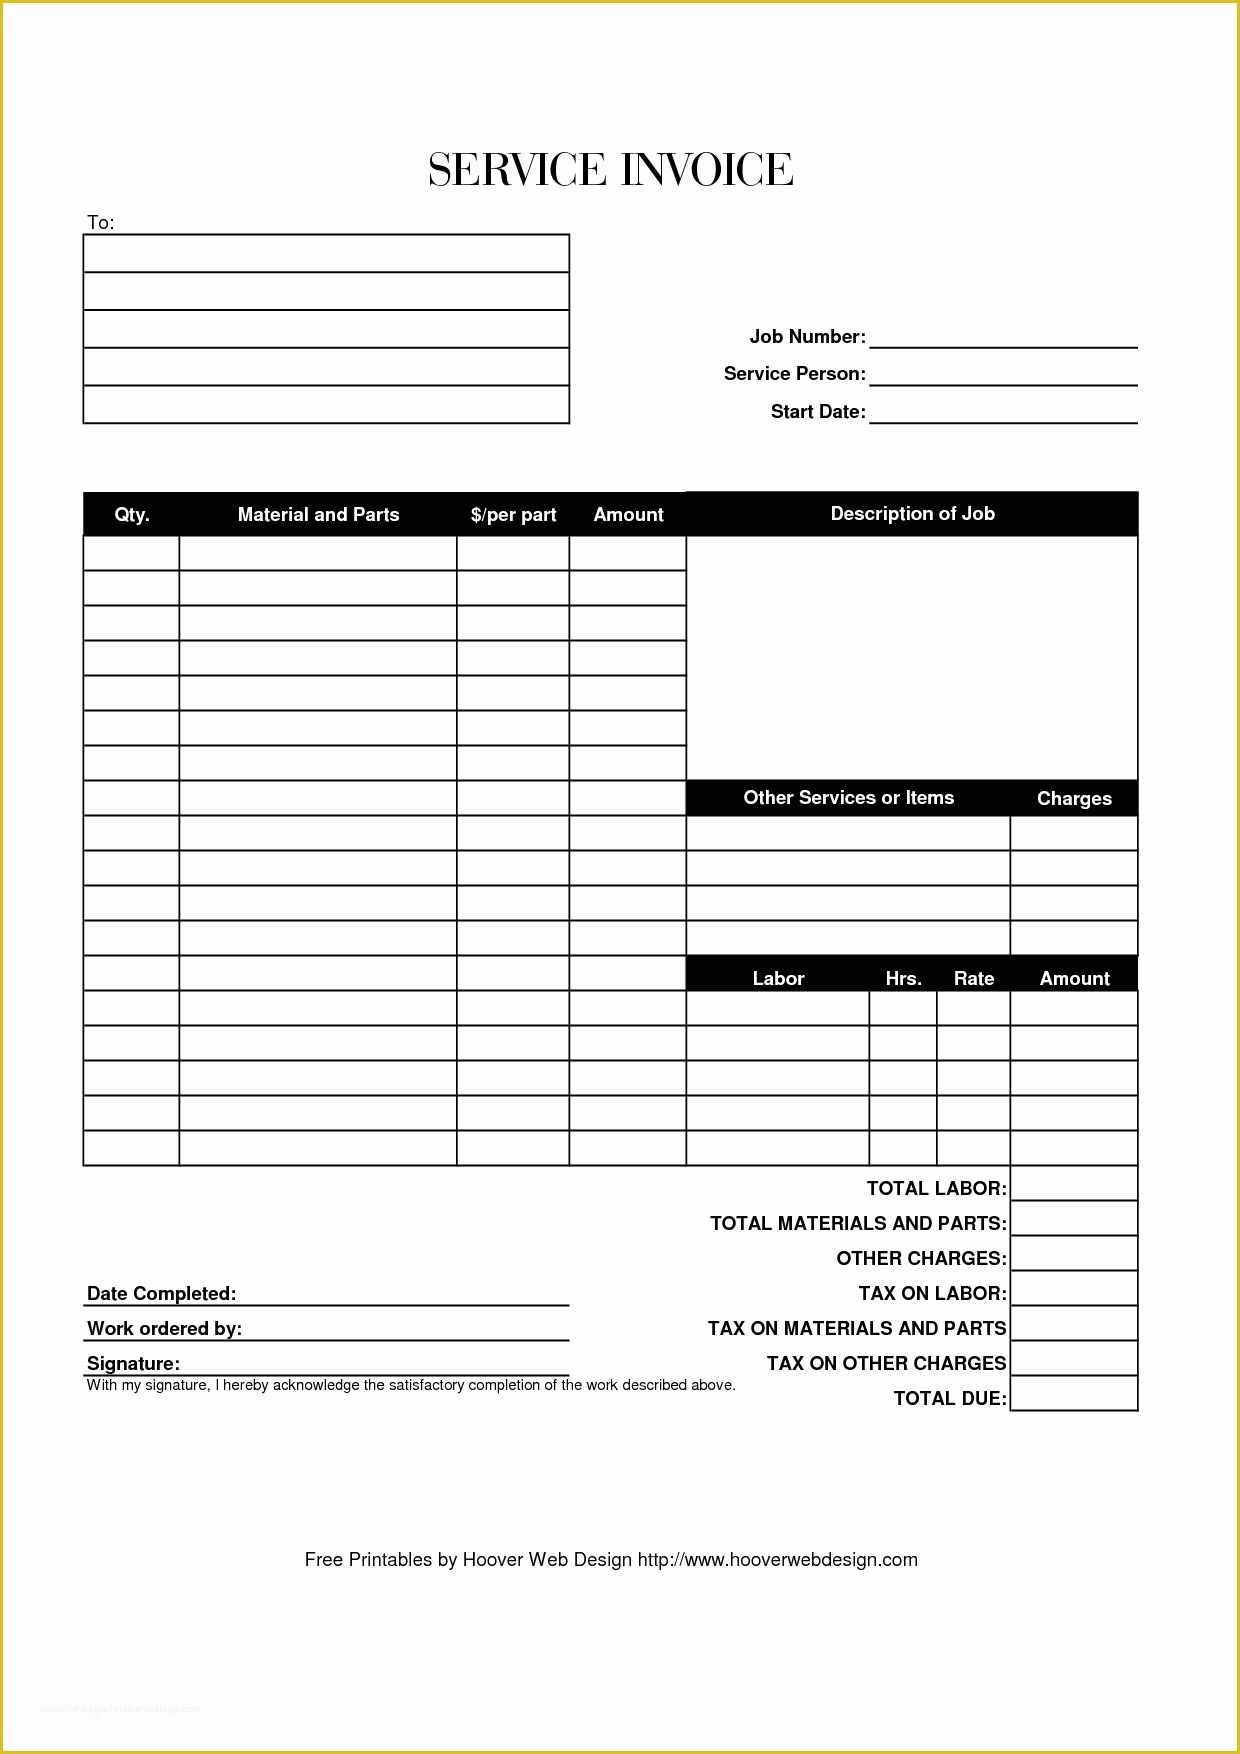 Free Sales Receipt Template Pdf Of Hoover Receipts